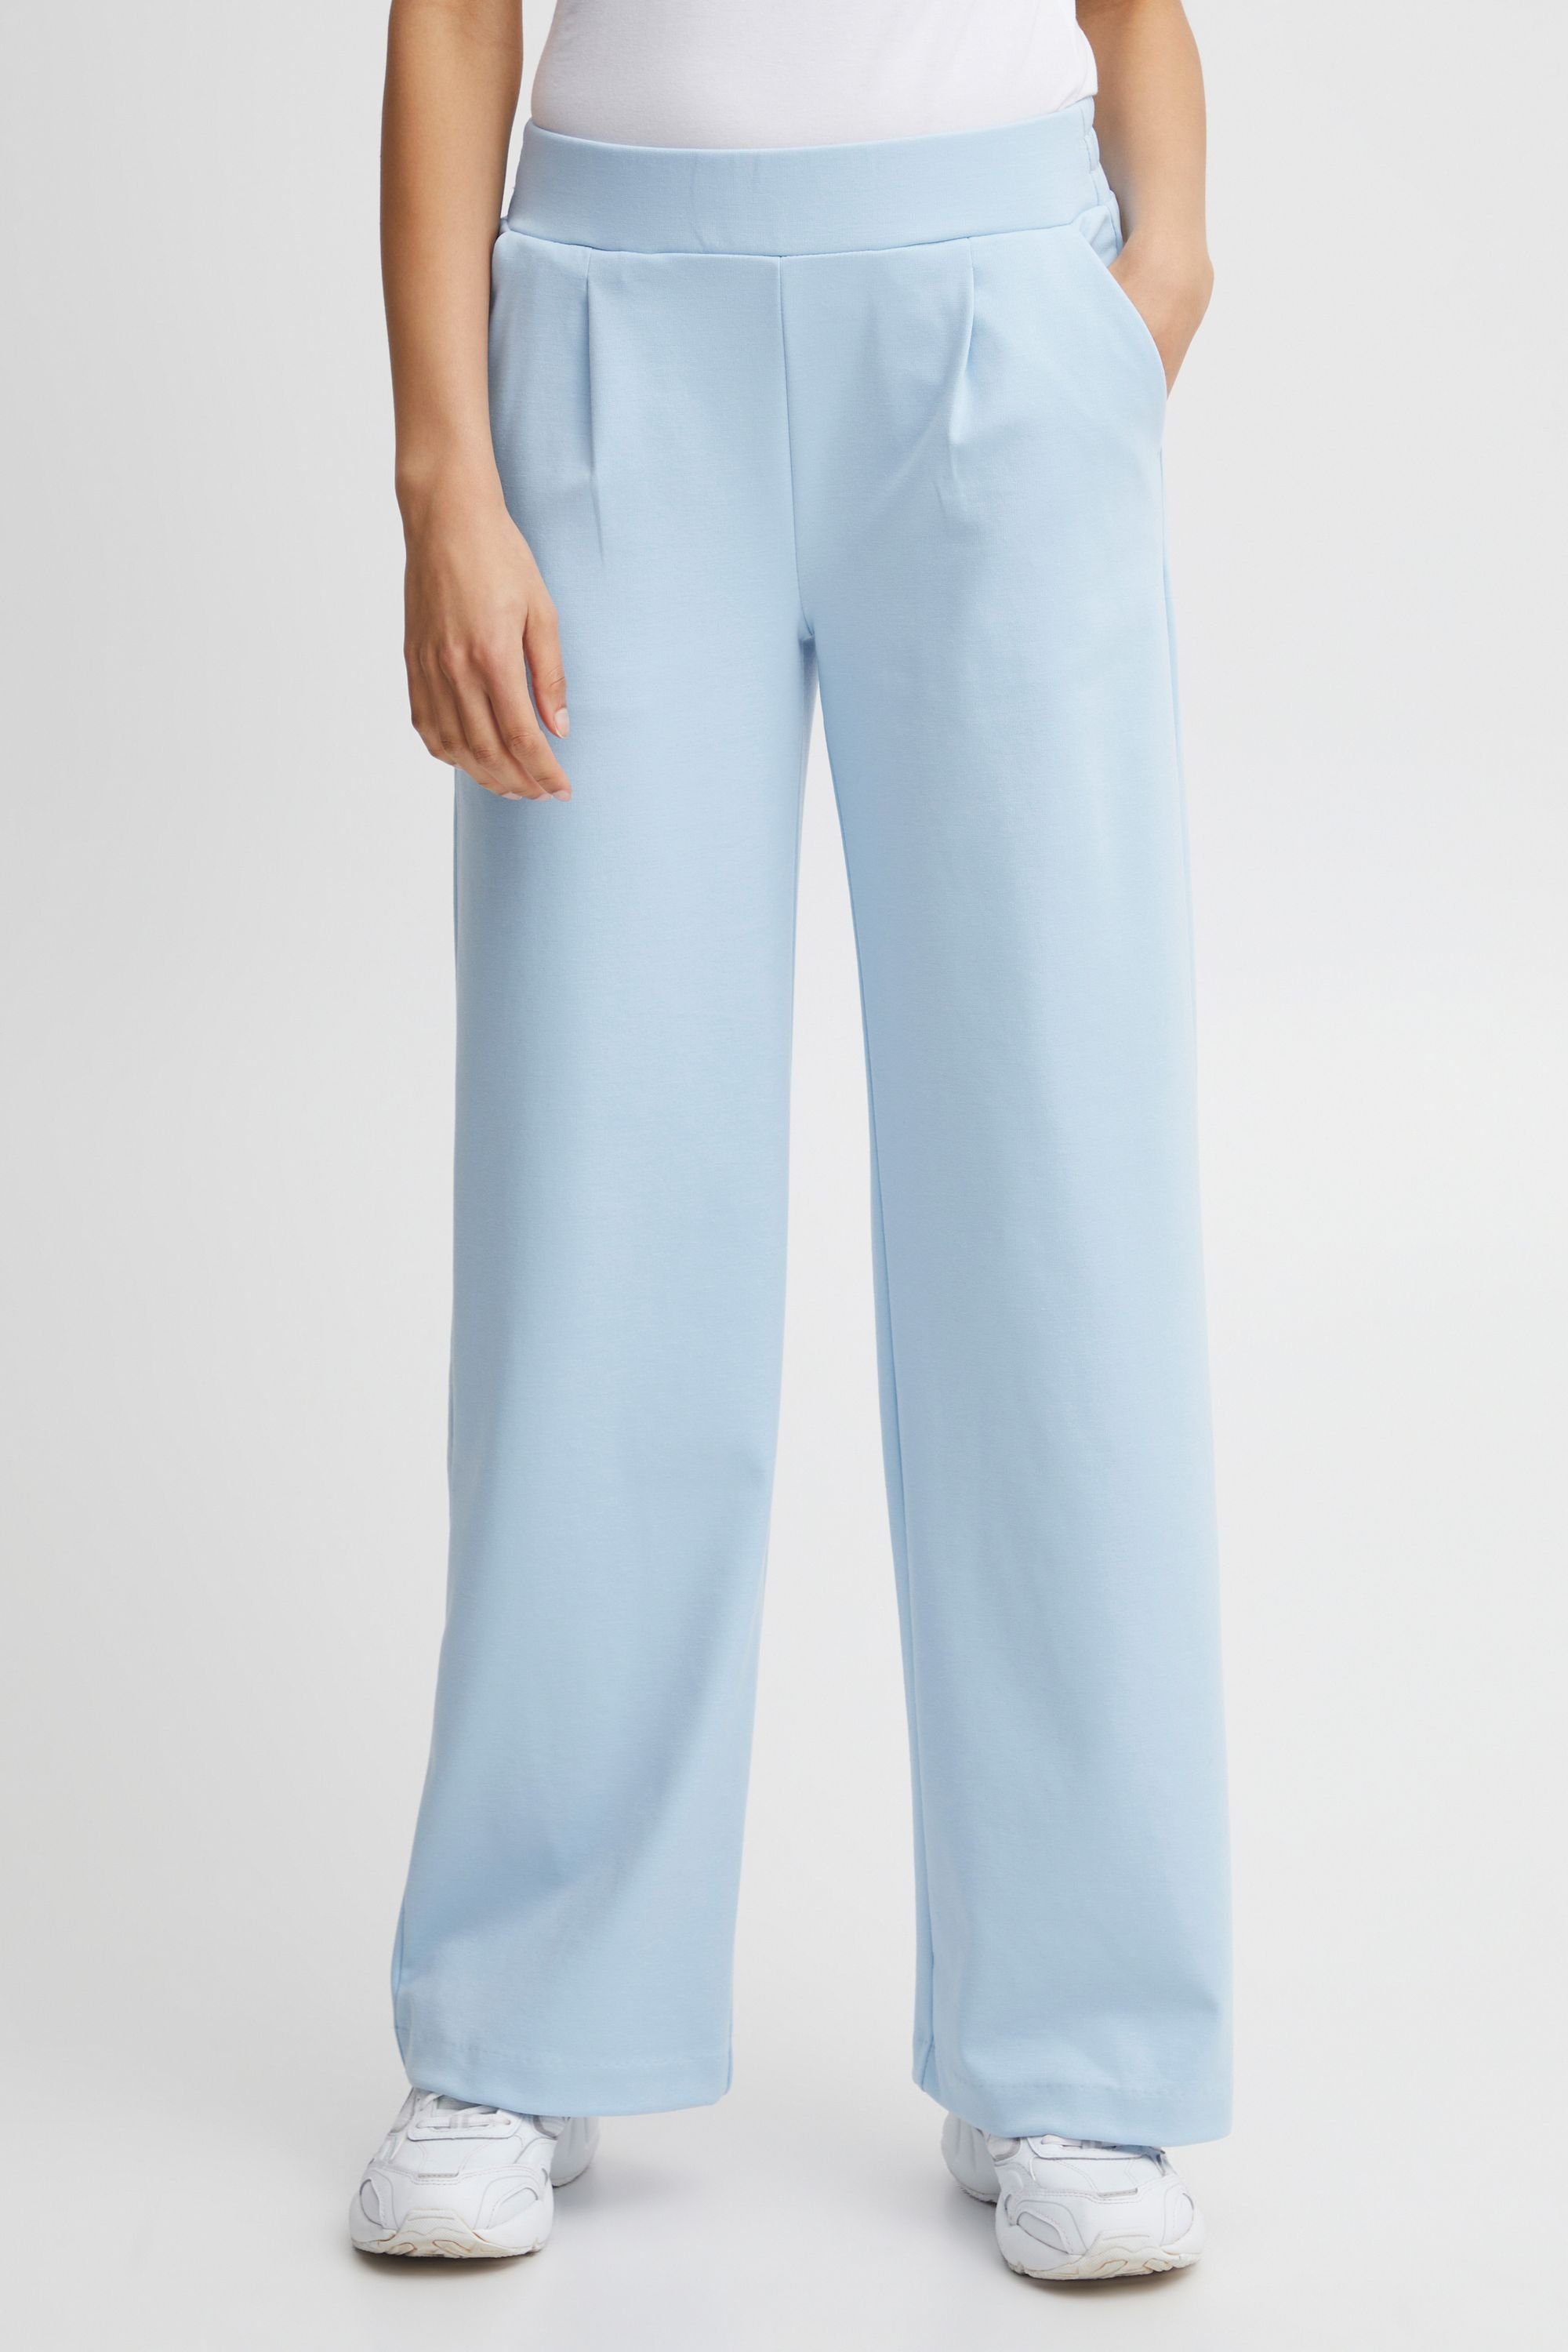 WIDE 20812847 - BYRIZETTA PANTS Stoffhose Blue 2 Bell 2 (144121) b.young